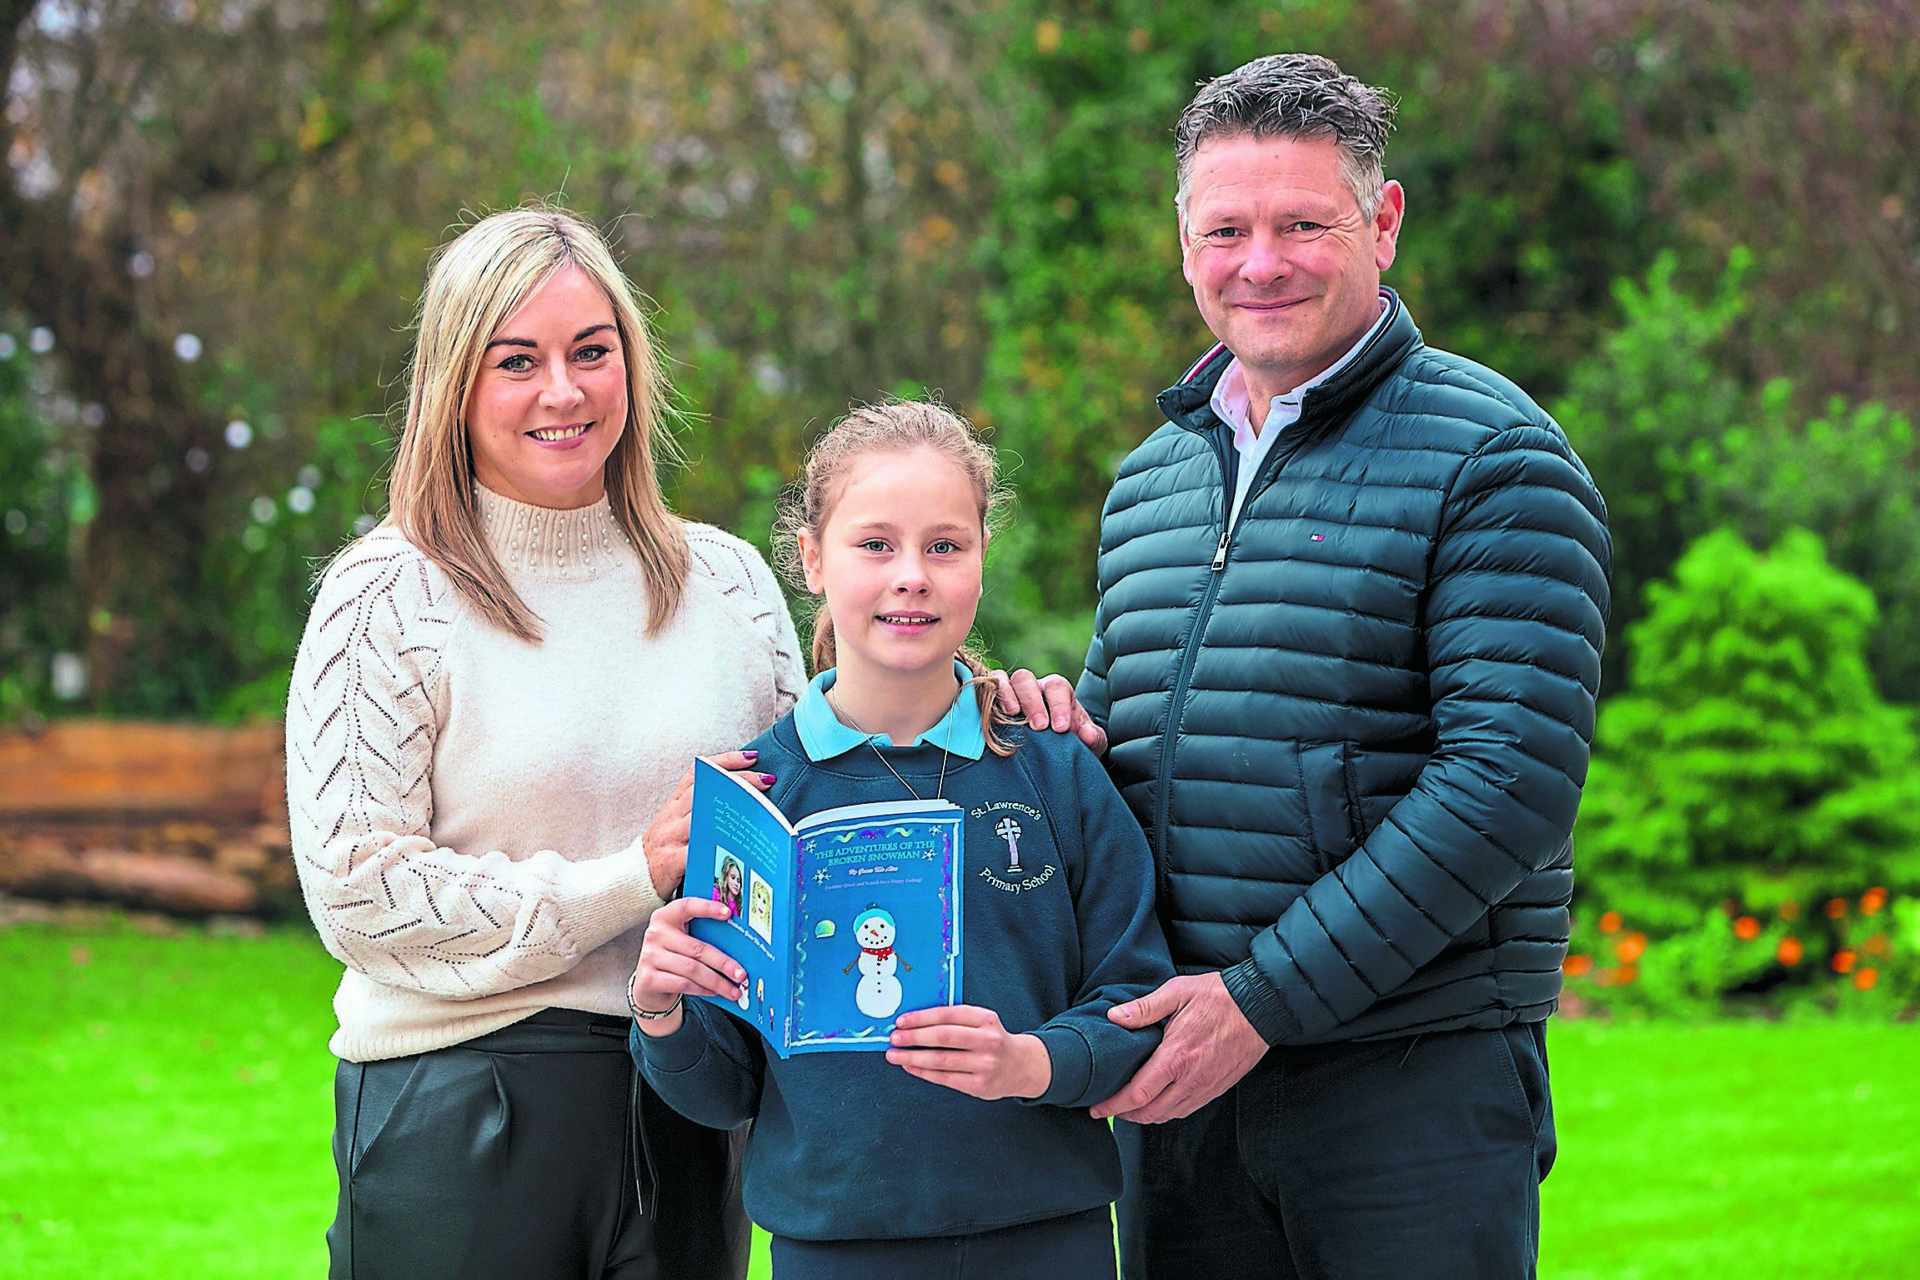 10 year old Grace McAtee is writing her future with new book